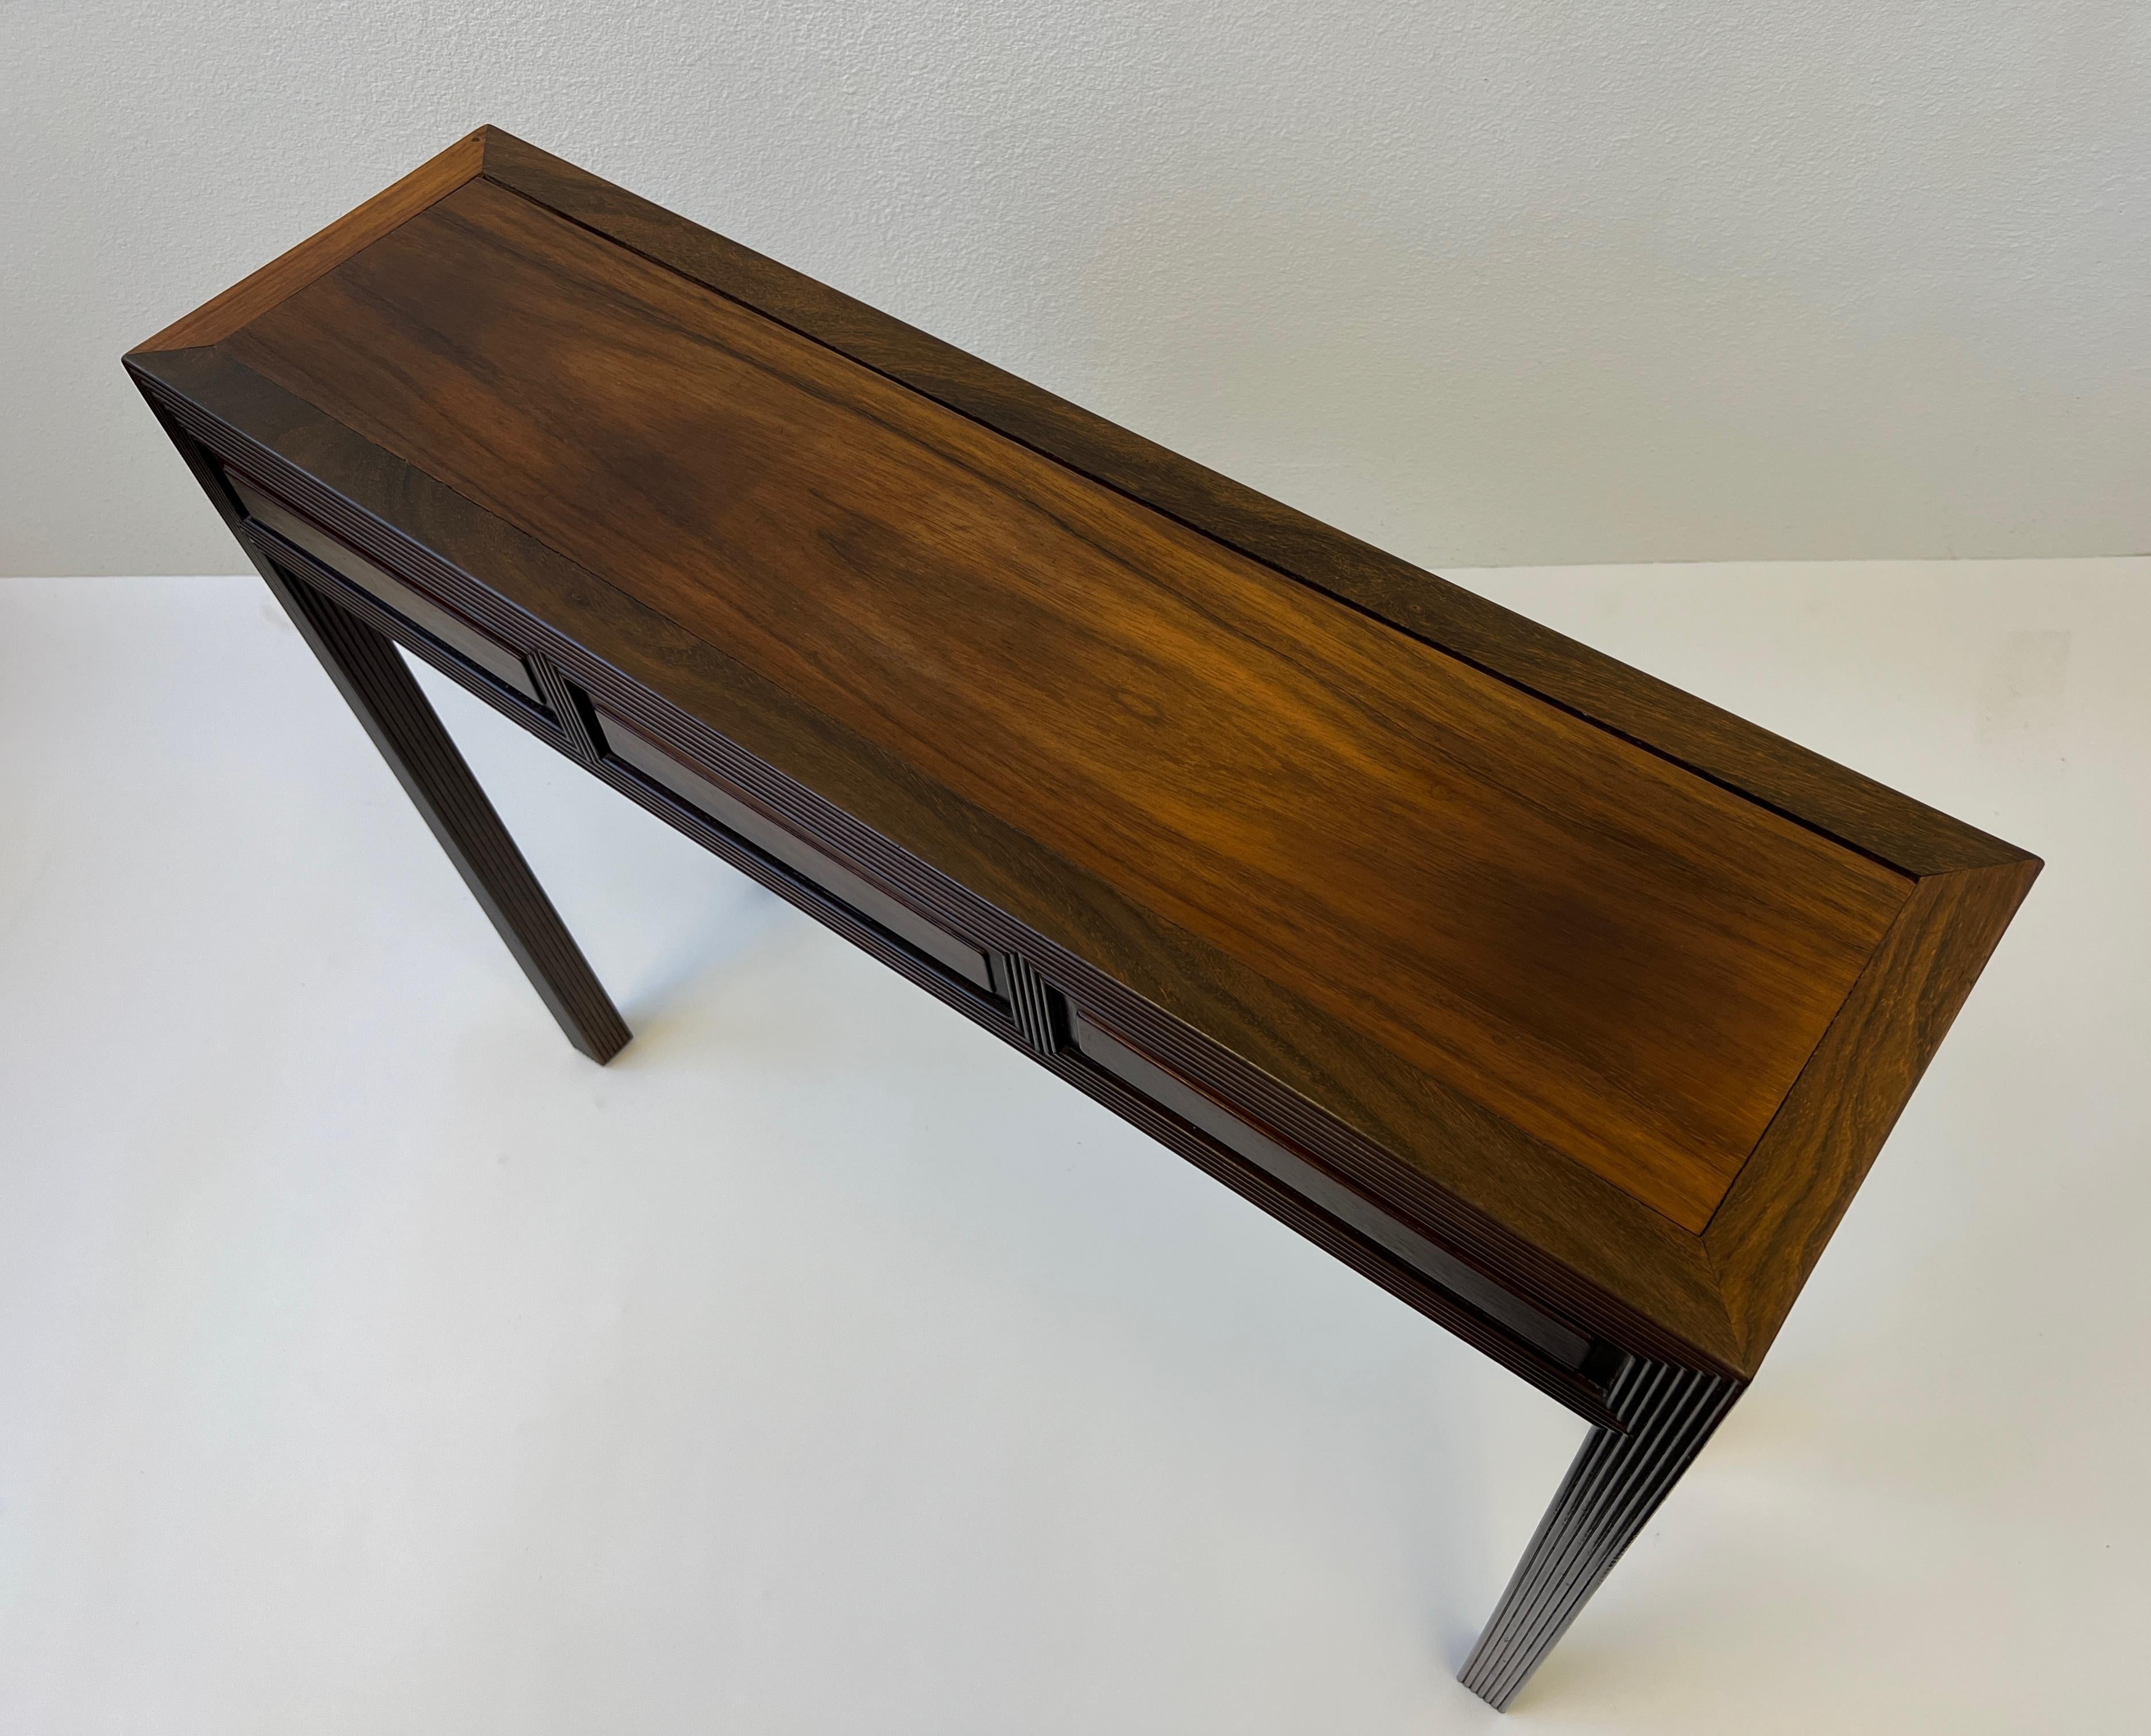 Wood Solid Rosewood Console Table With Drawers 